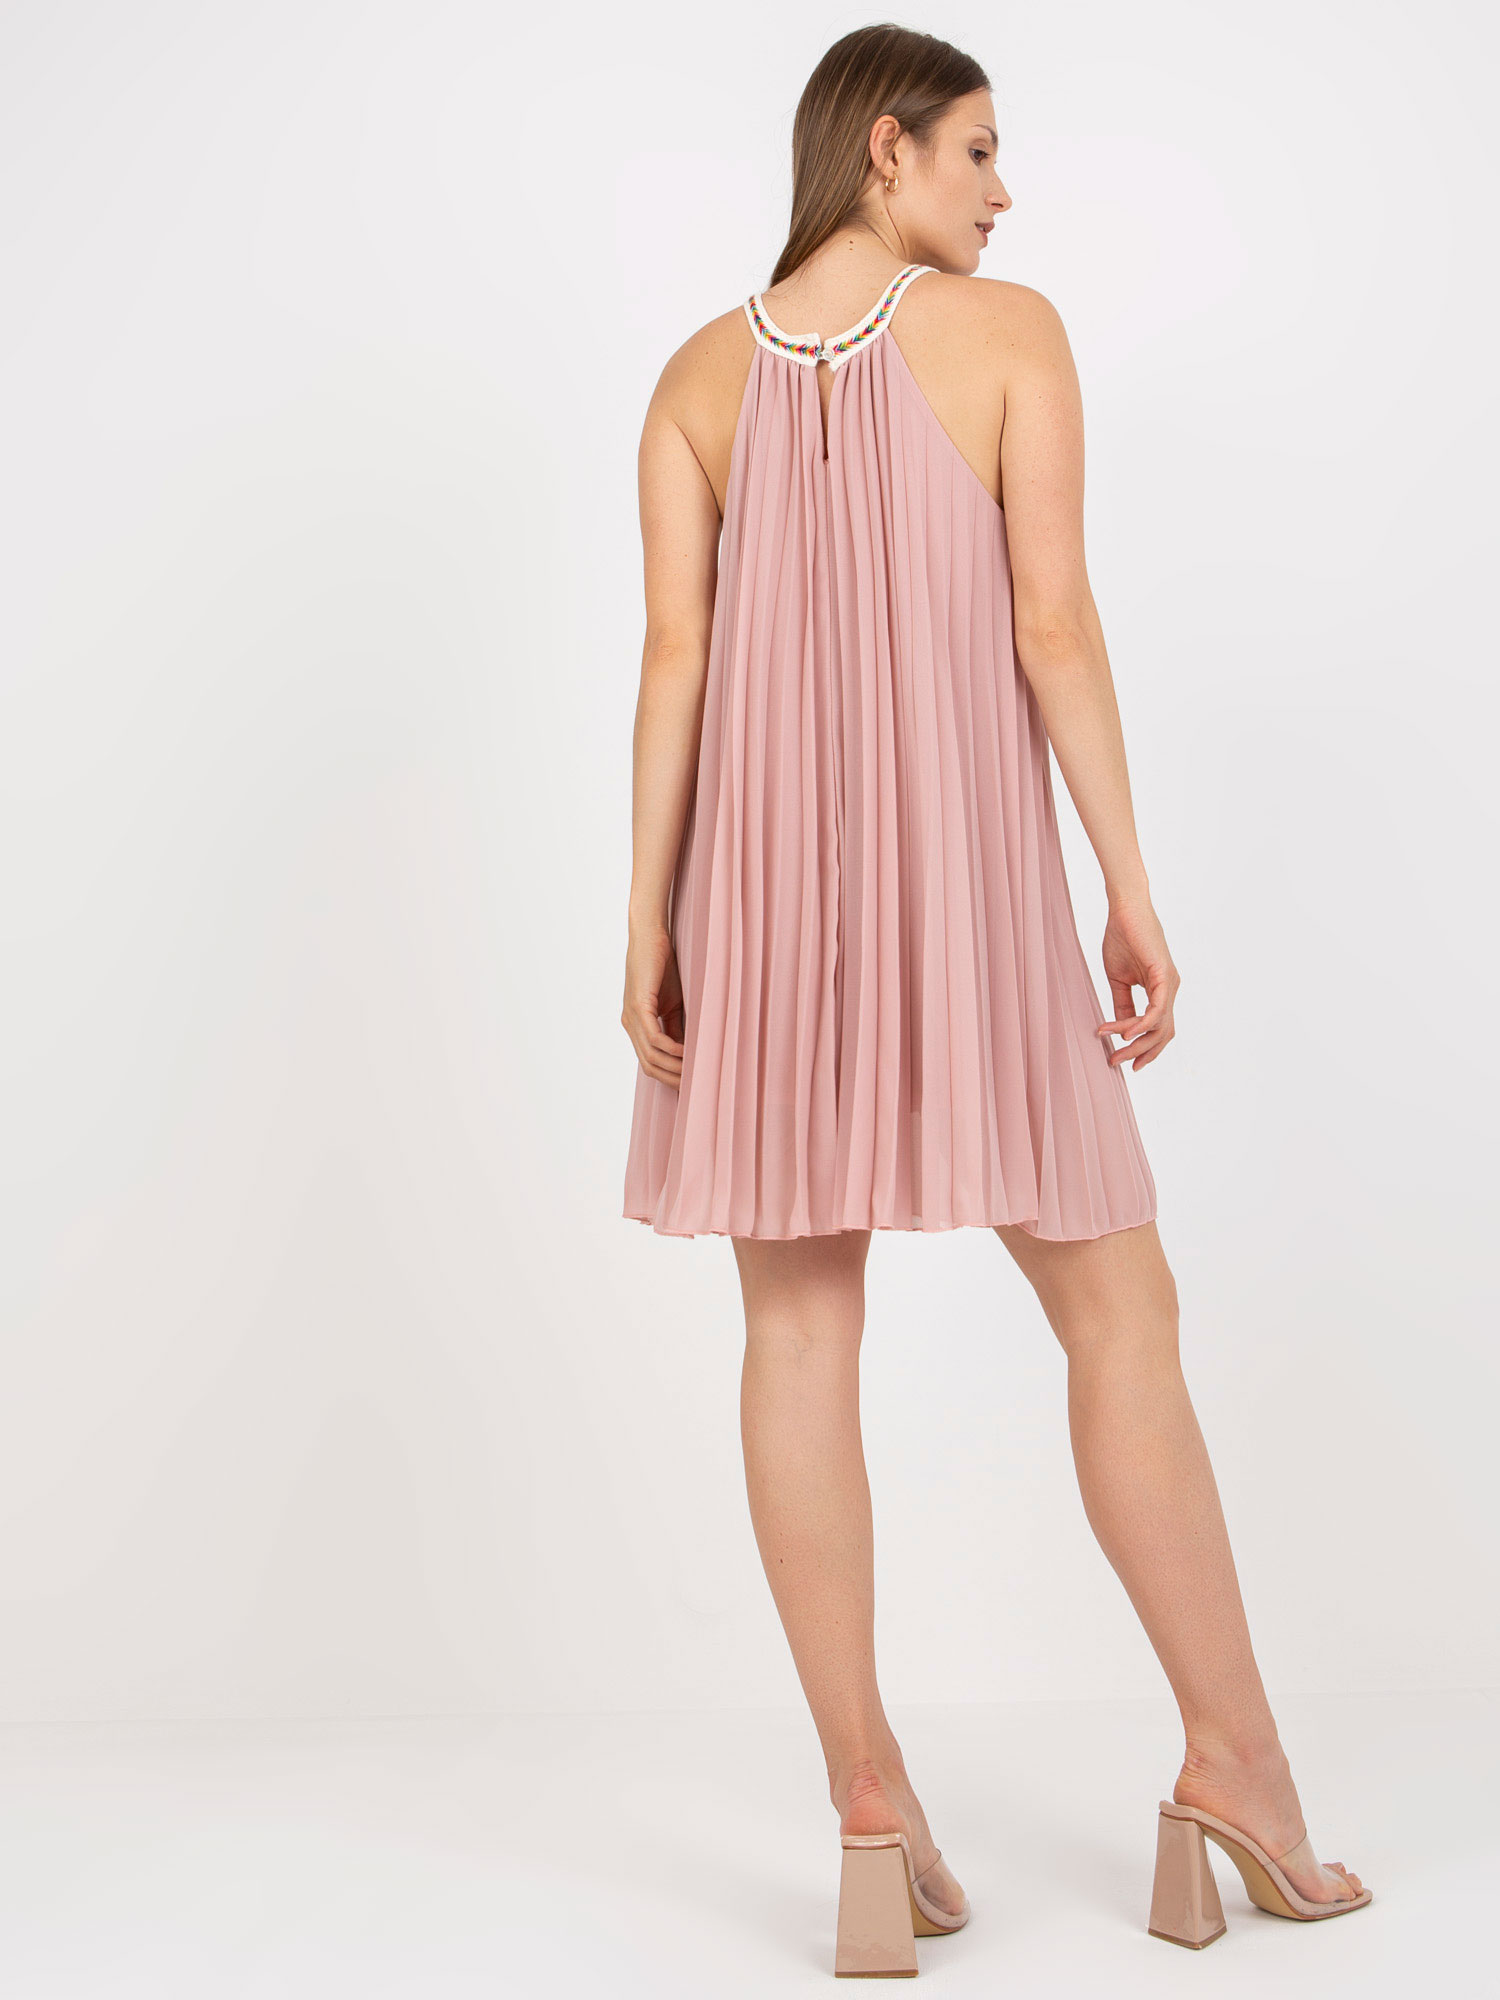 Dusty pink one-size sundress without sleeves